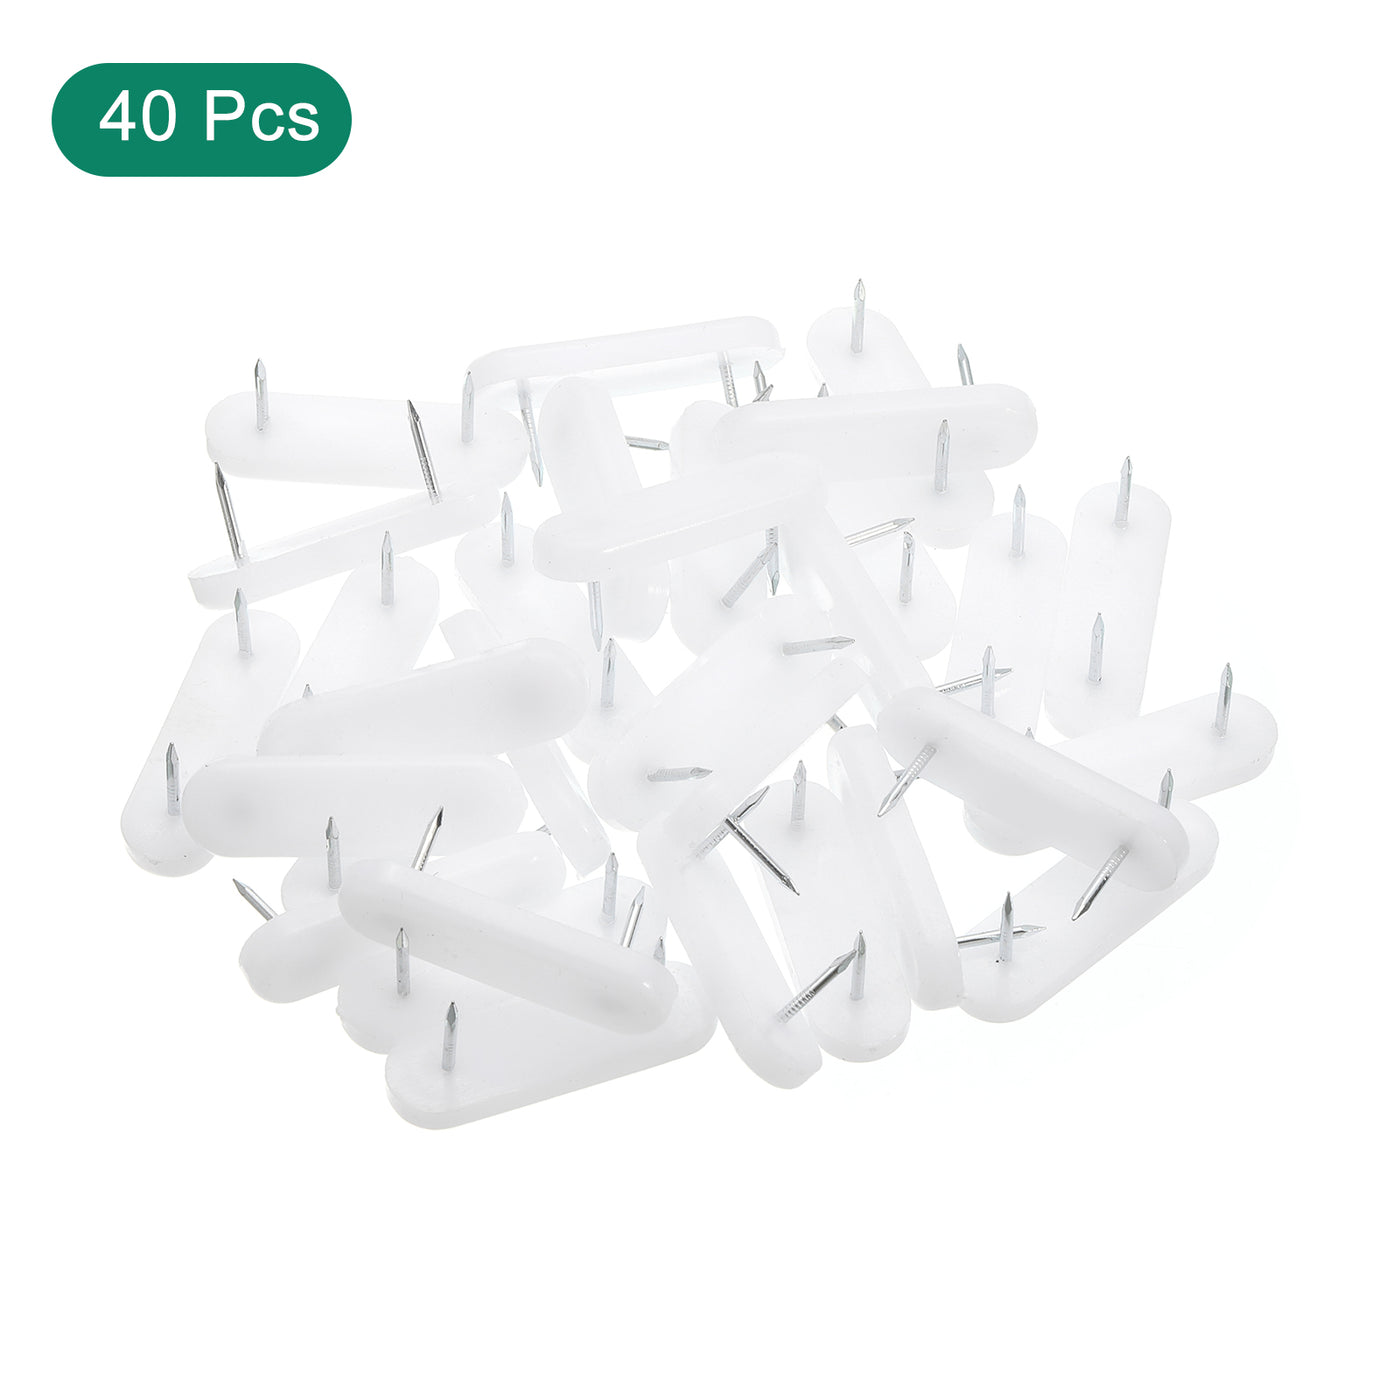 uxcell Uxcell Nail on Furniture Glides, 40pcs Plastic Double Pins Furniture Sliders